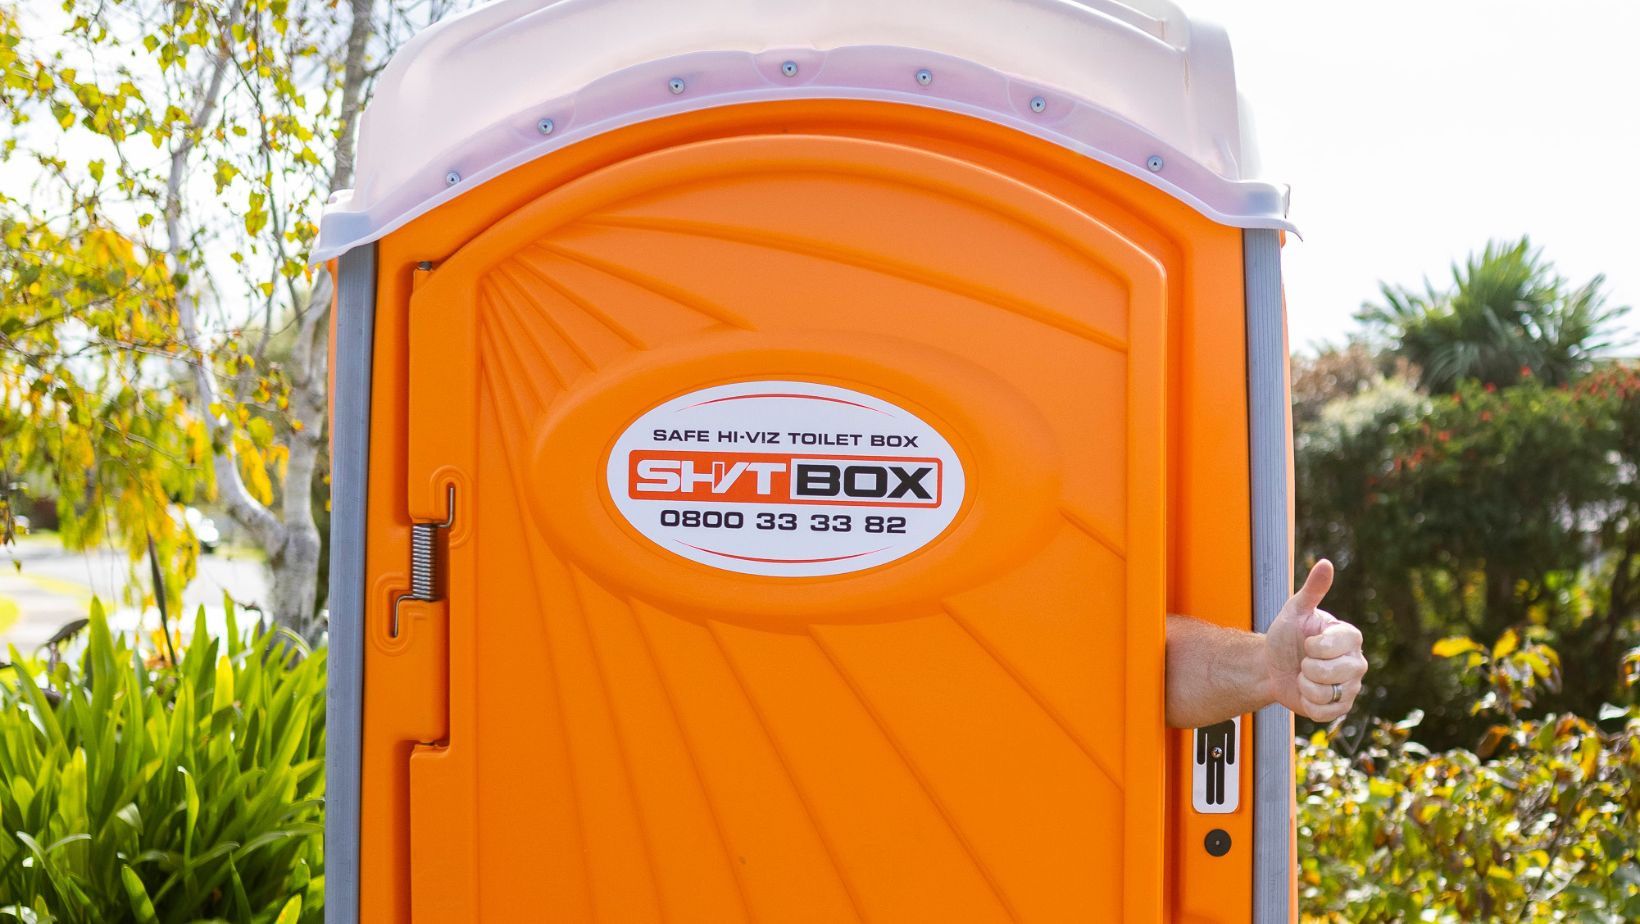 How much to hire a standard portaloo